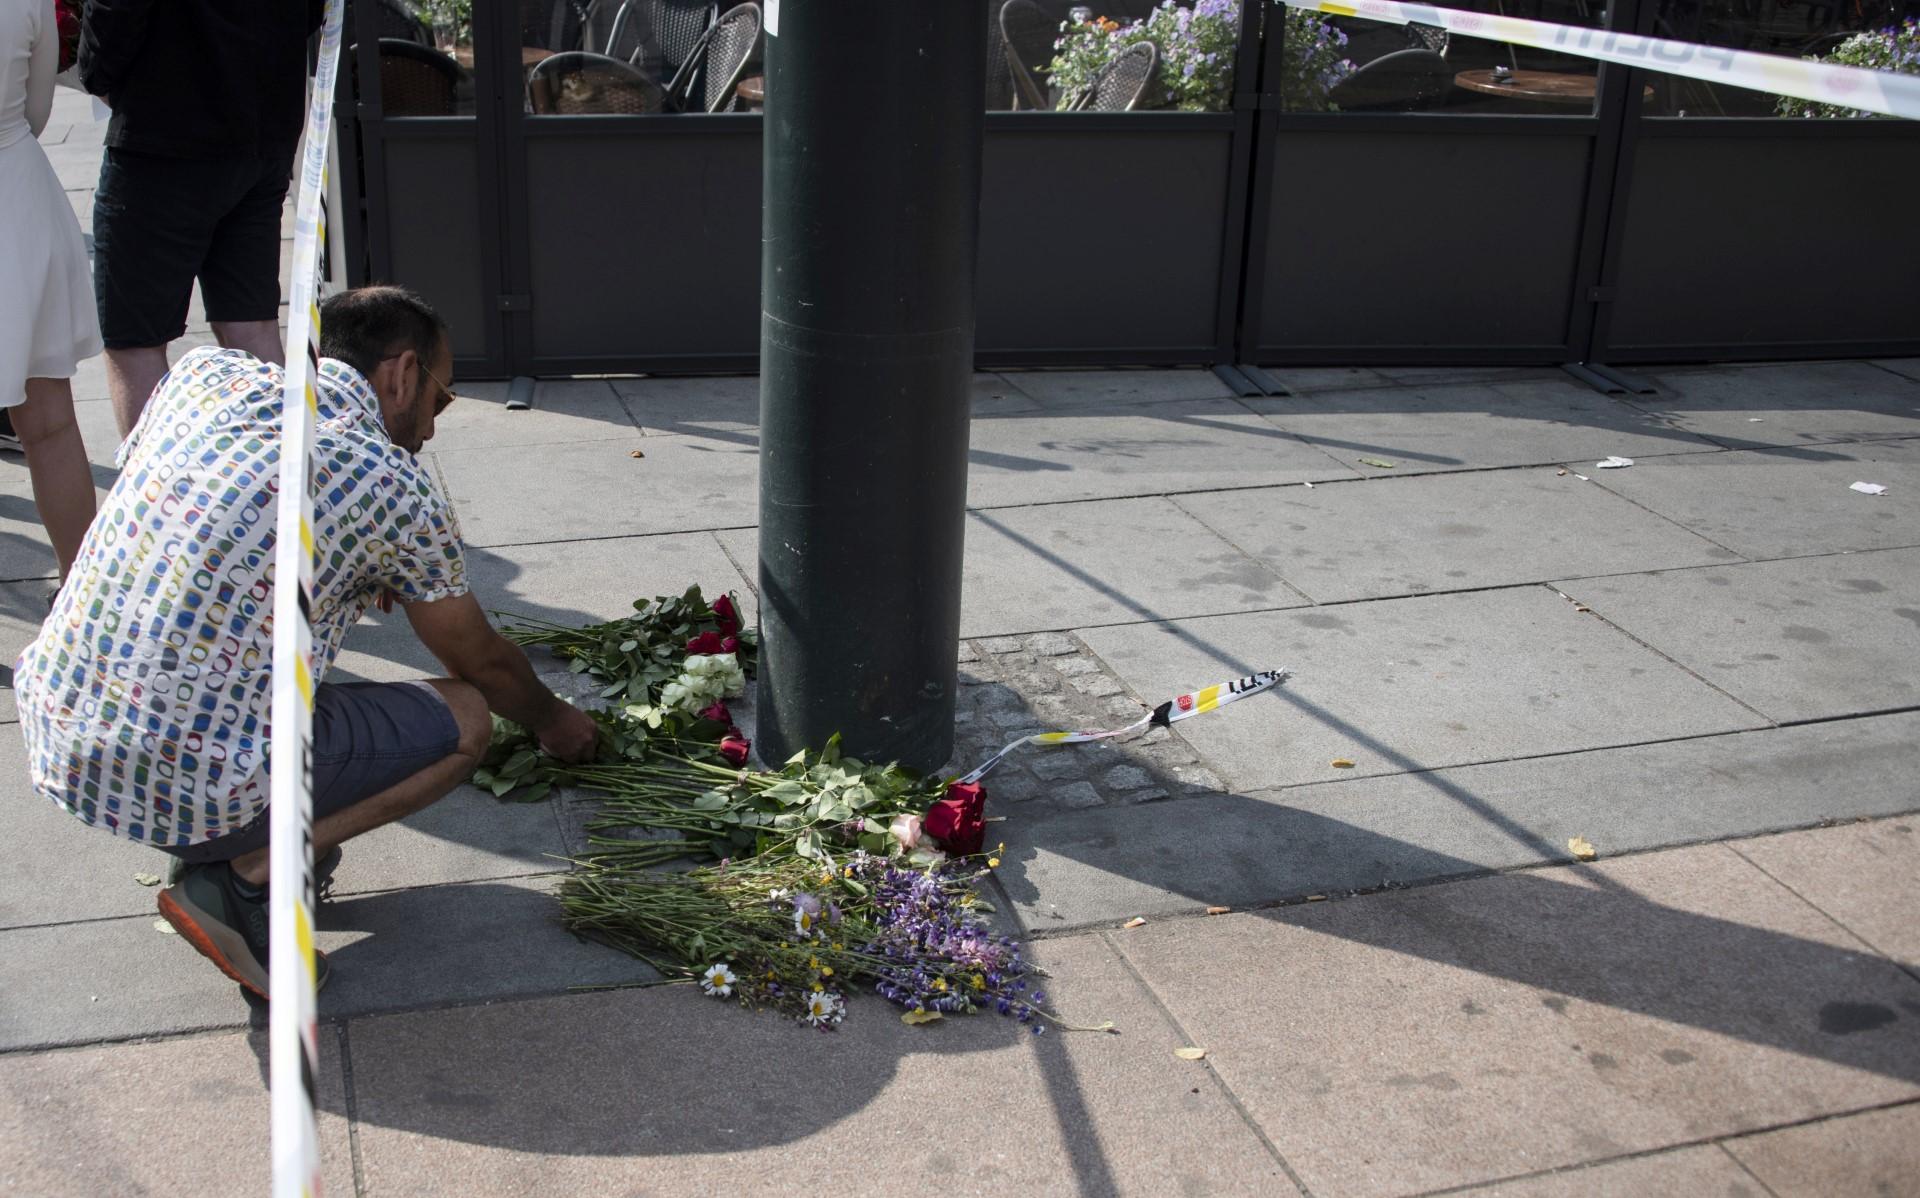 A man lays flowers at the crime scene on June 25, in the aftermath of a shooting outside pubs and nightclubs in central Oslo which killed two people and injured 21. Photo: AFP